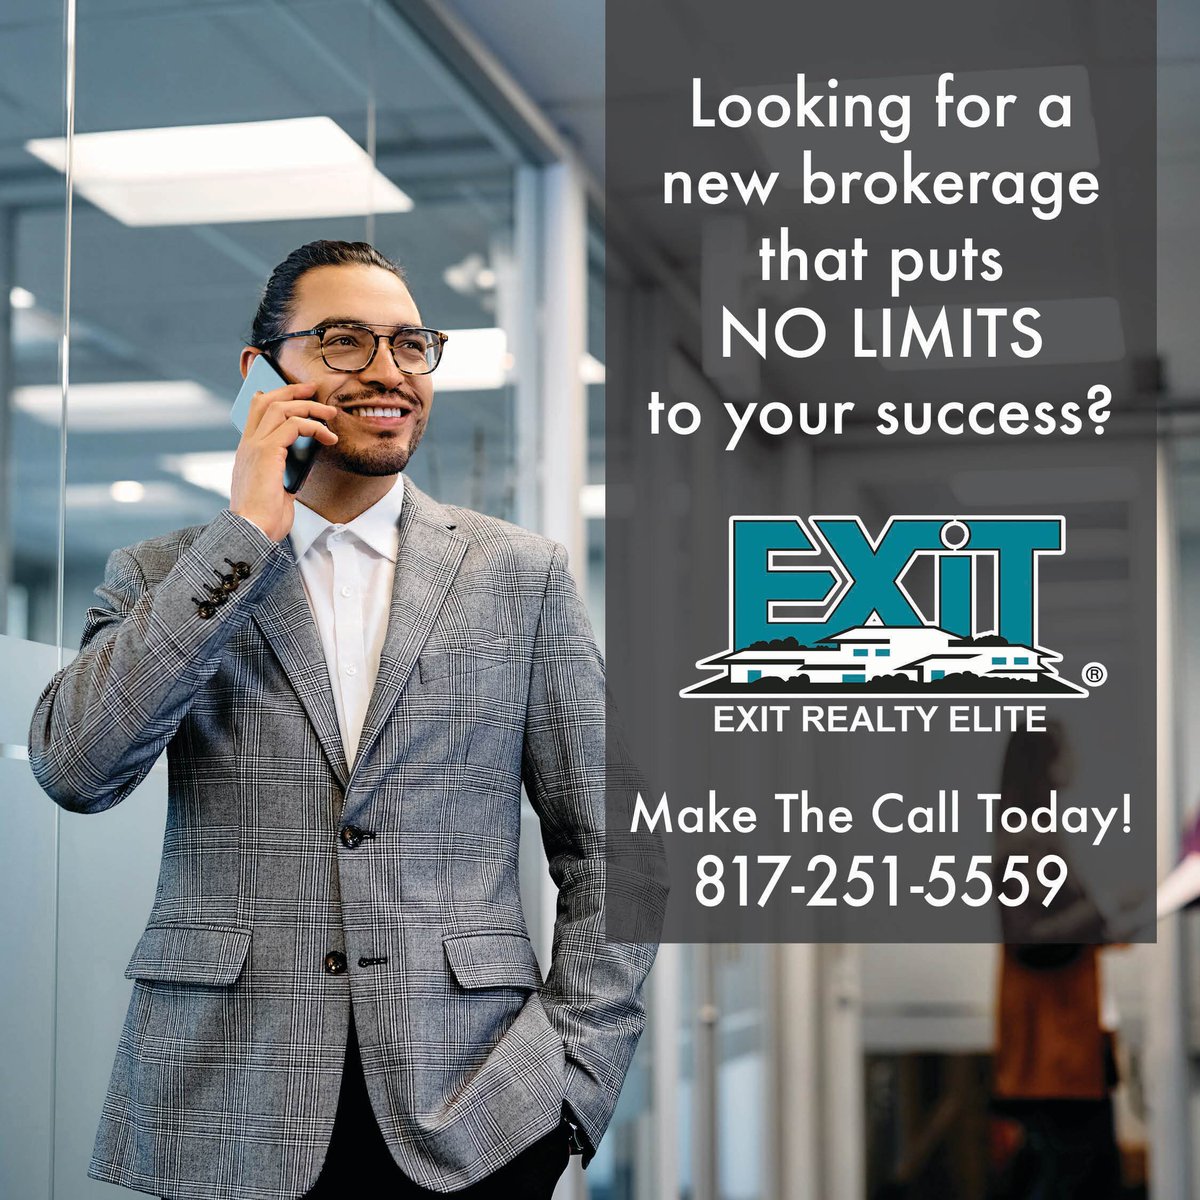 Looking for a brokerage with no limits on your success?

#LOVEXIT #ImSold #ThinkSmartThinkEXIT #RealEstateReinvented #ListwithEXIT #DFWMetroplex #buyahome #sellahome #EXITRealtyElite #RealEstateCareers #TexasRealEstate